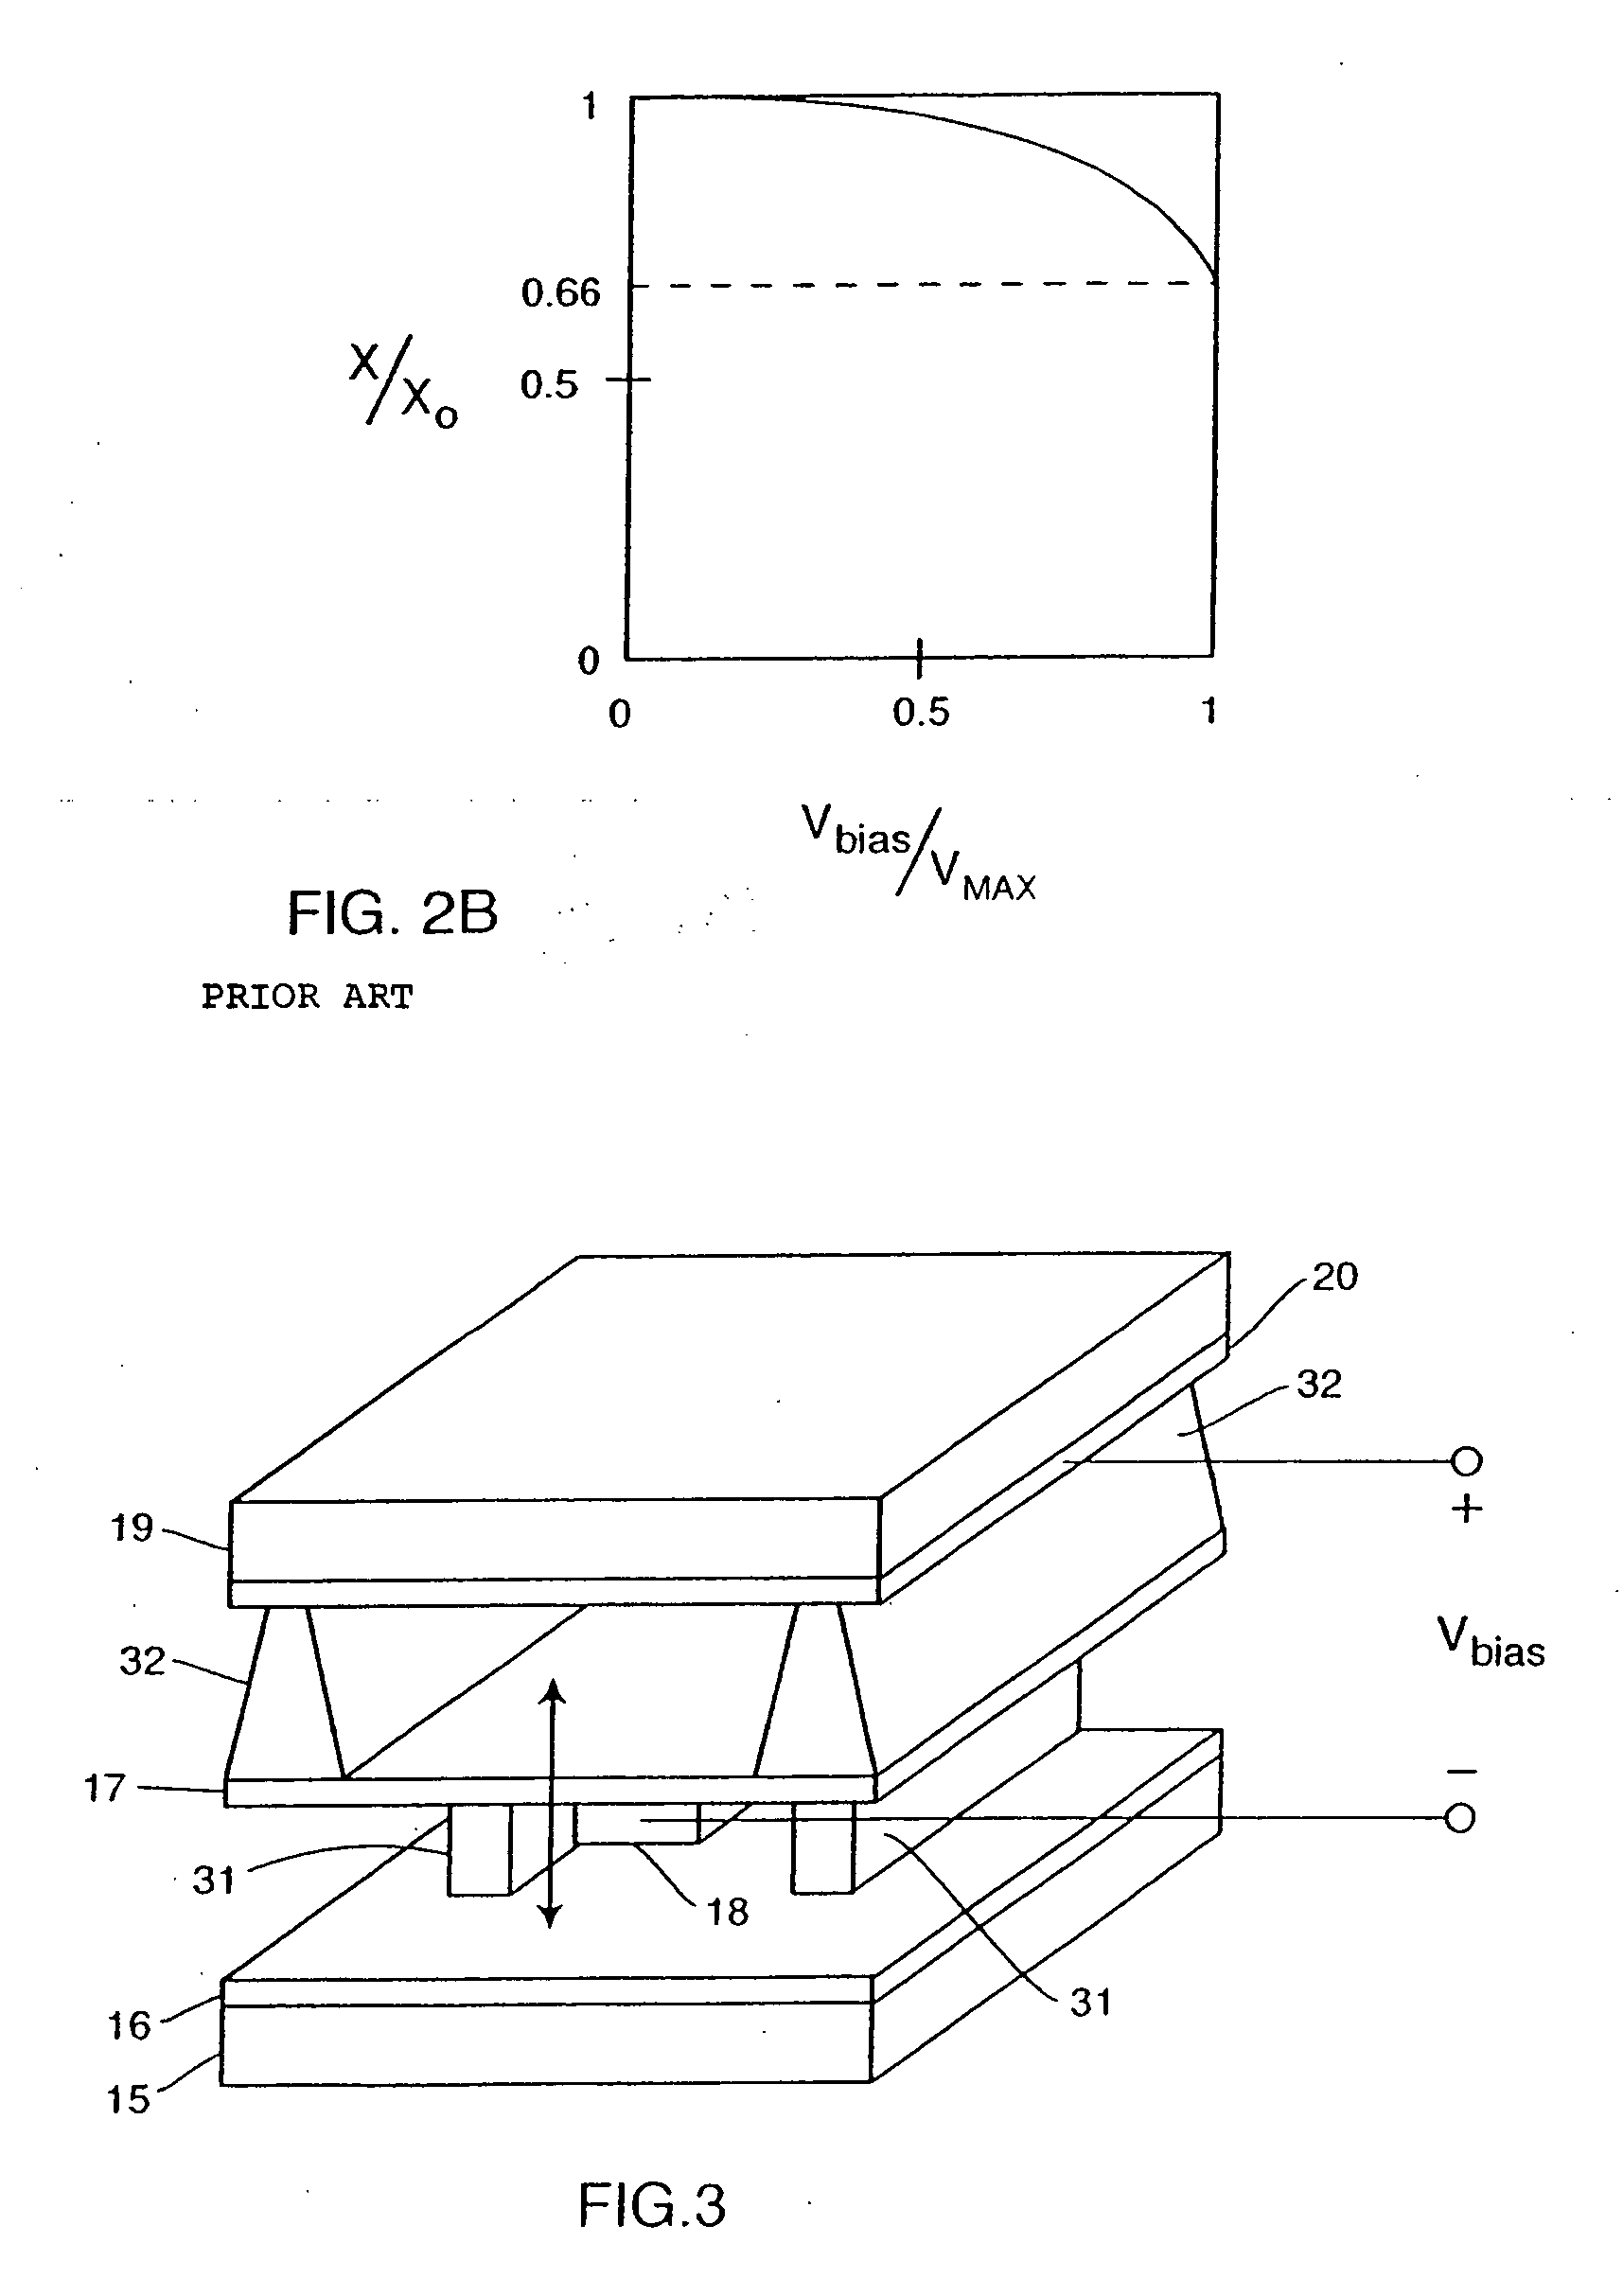 Variable capacitance membrane actuator for wide band tuning of microstrip resonators and filters